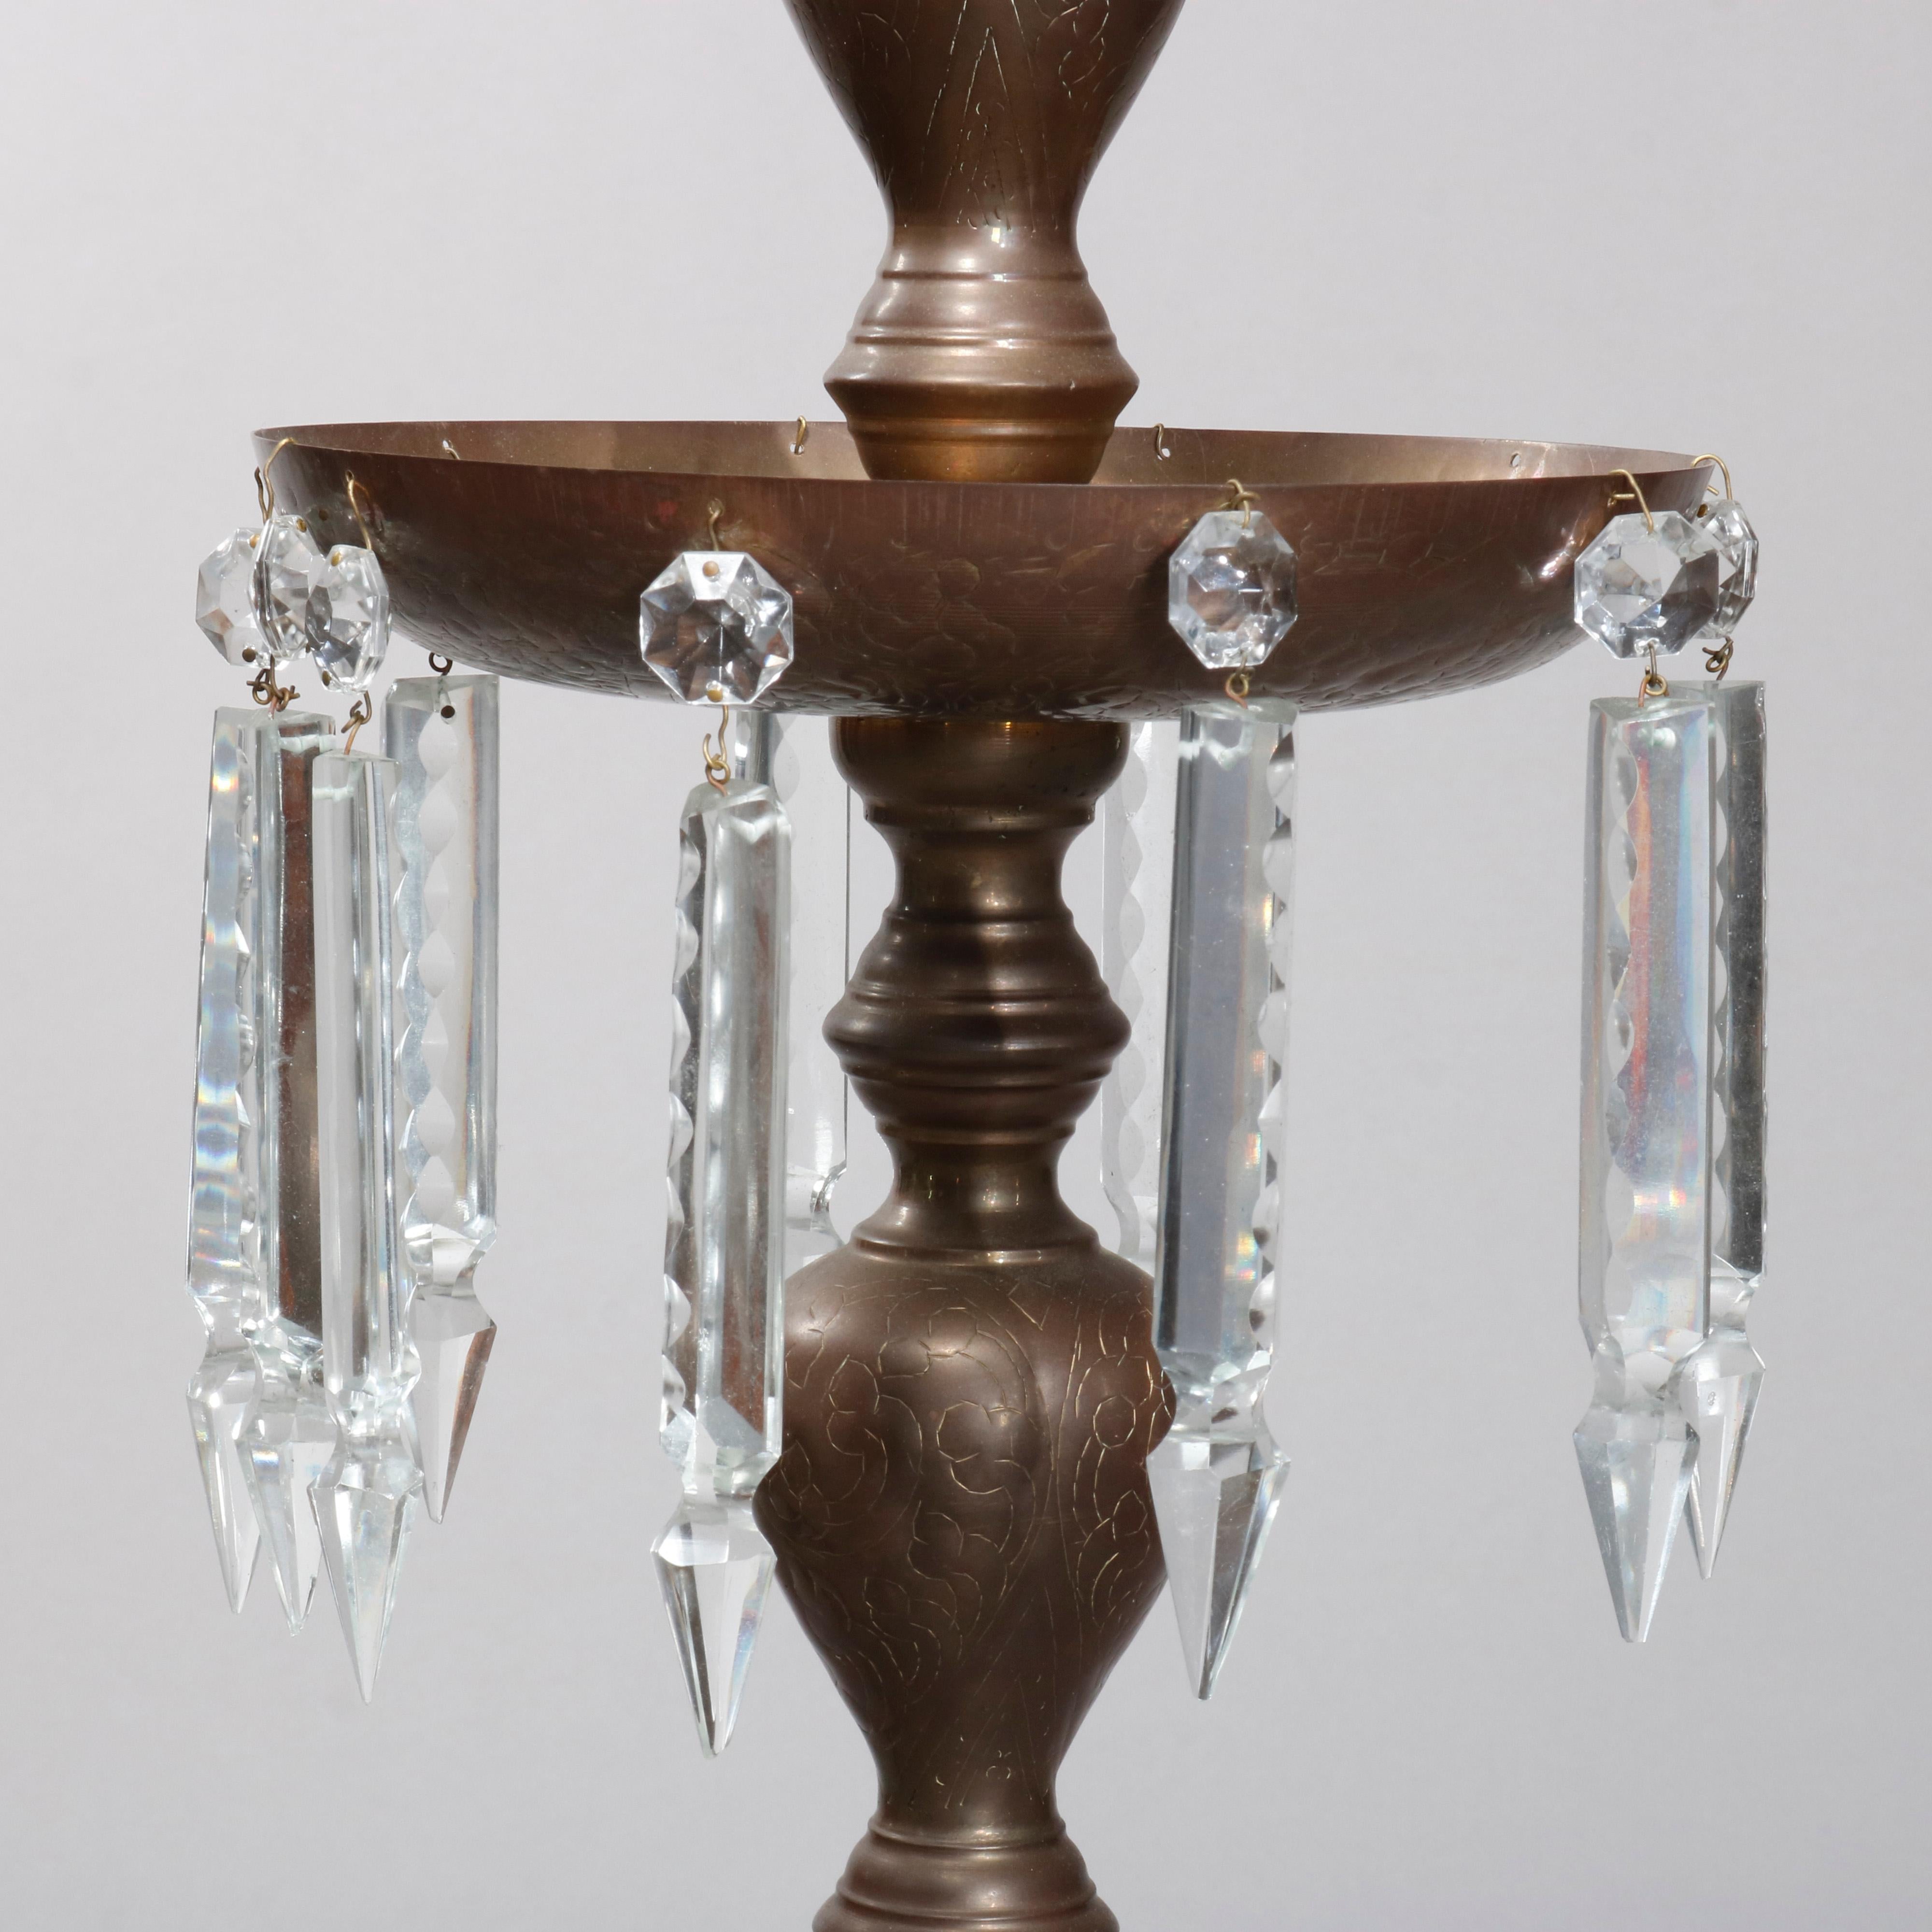 An antique pair of floor candelabra offer brass construction in balustrade form with bobeches having hanging crystals and Persian elements, circa 1930.

 Measures: 49